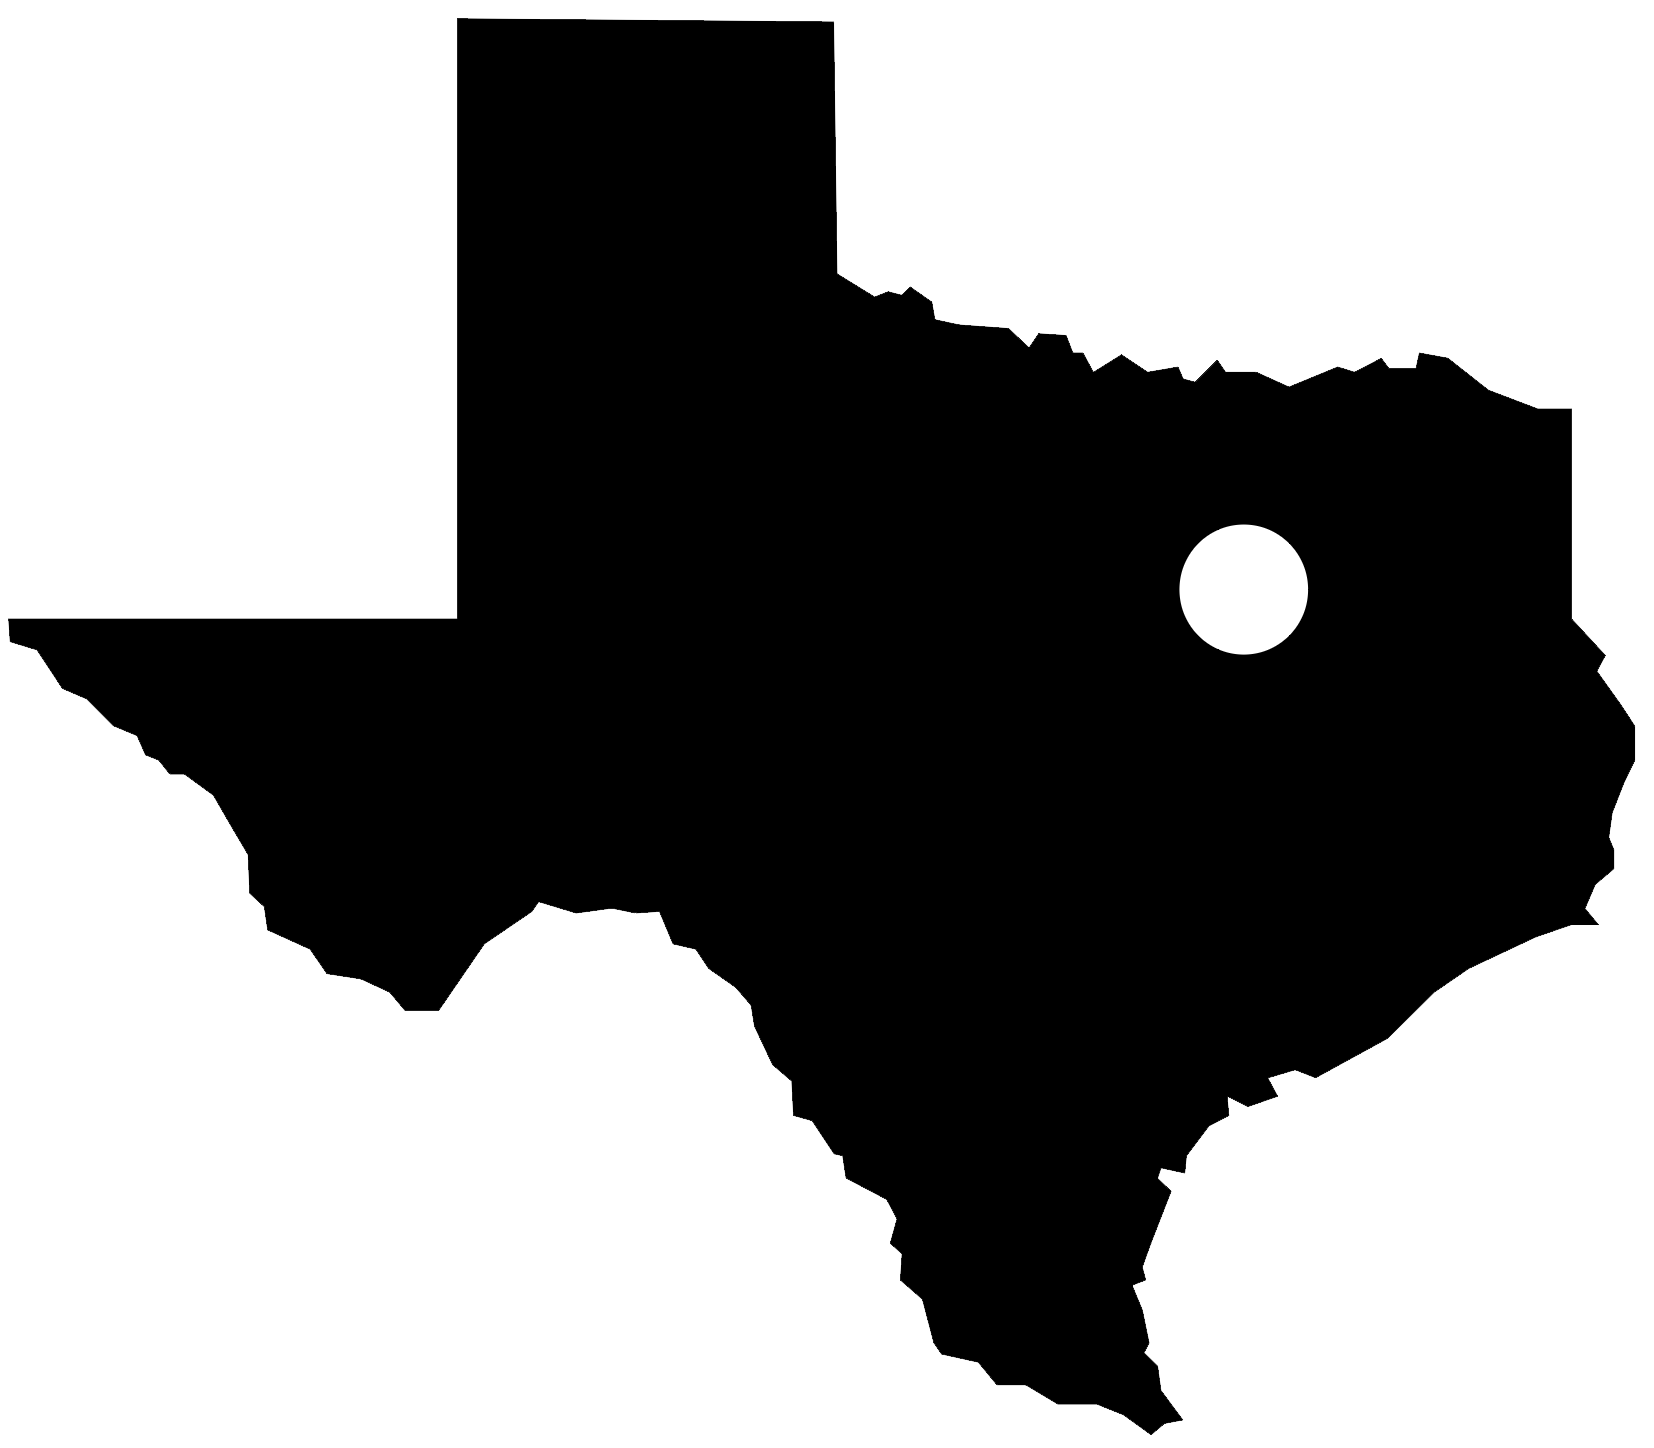 A small map showing the location of Gun Barrel City